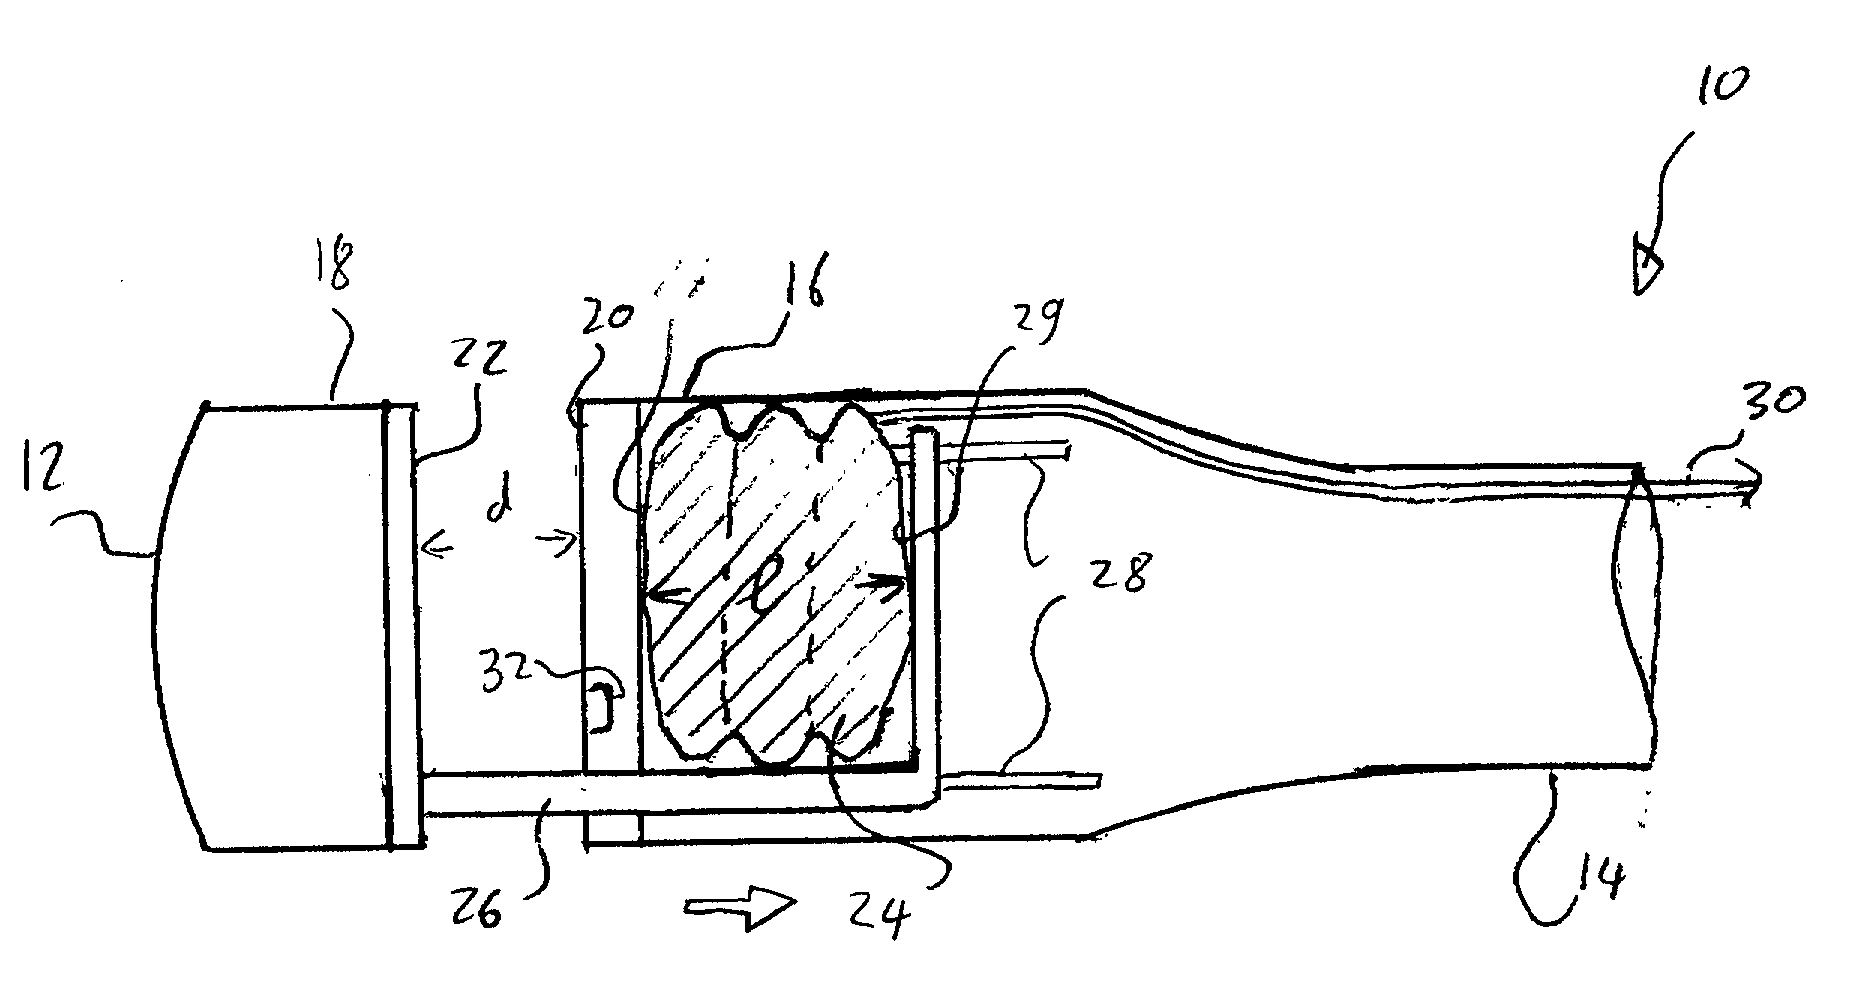 Balloon actuator for use in a resectioning device